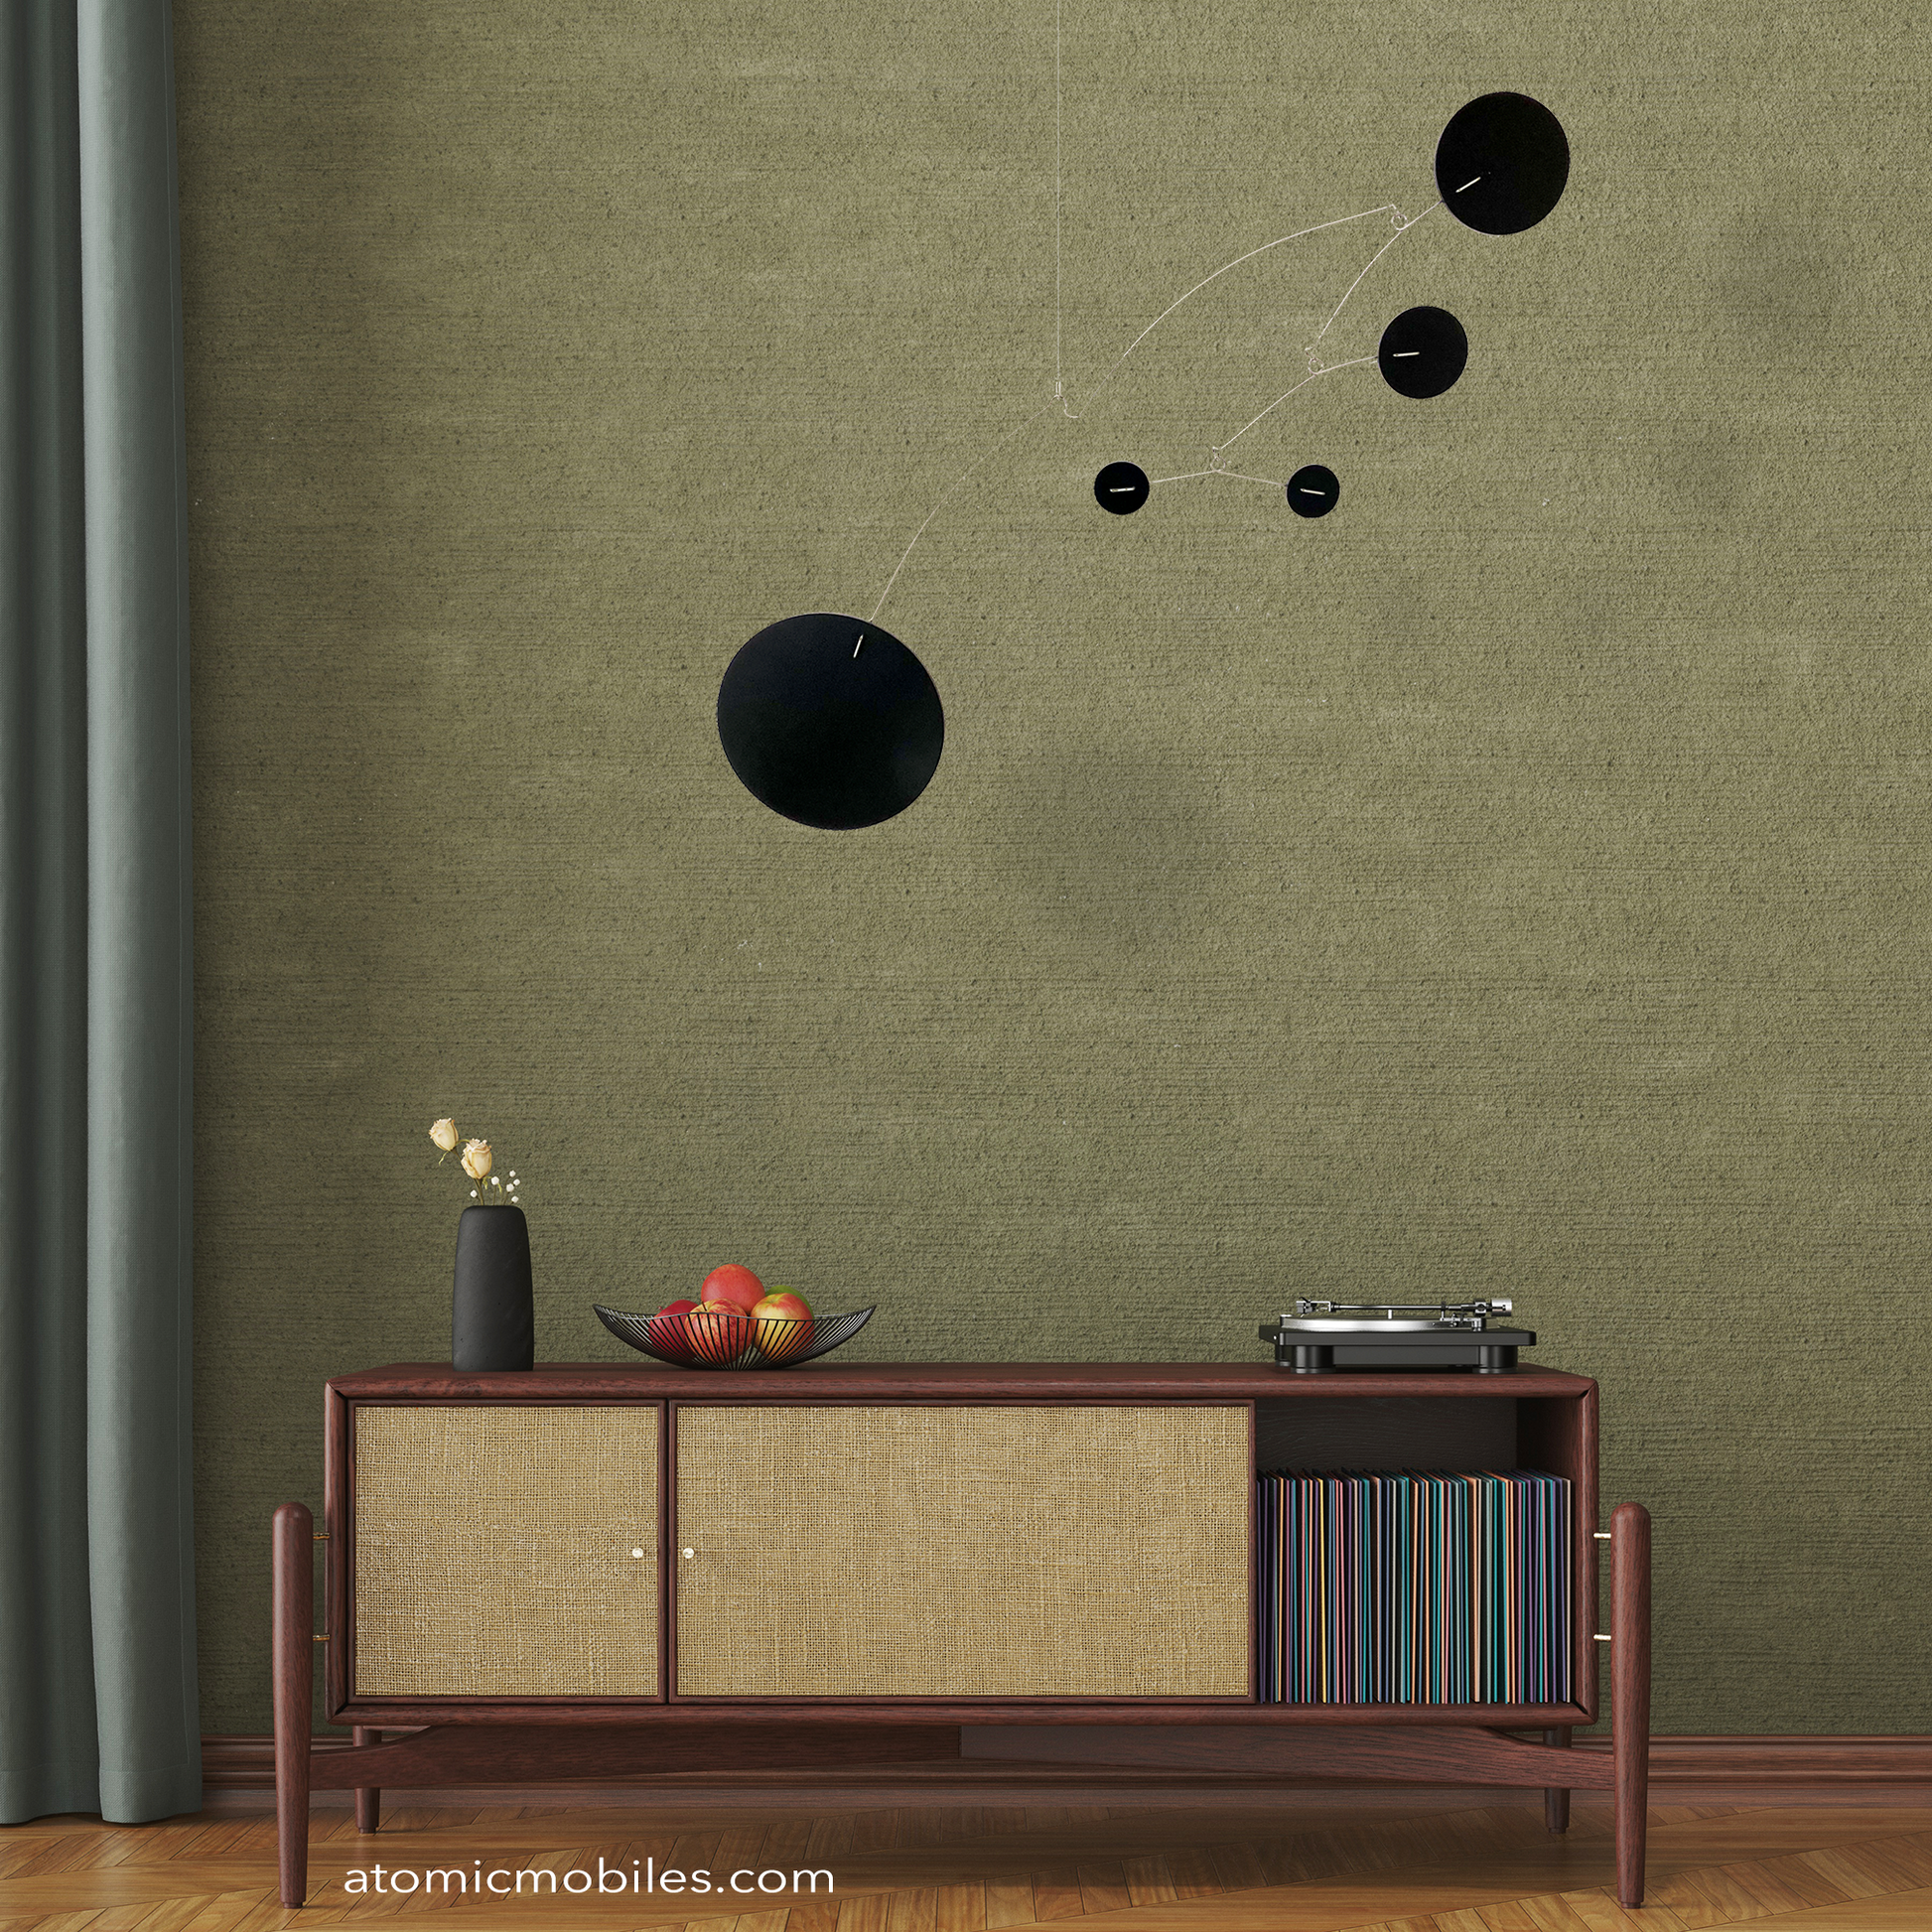 The Moderne Hanging Art Mobile in all Black in mid century style room with record player turntable, fruit basket, record LP albums, credenza, with dark green wall and parquet wood floor - by AtomicMobiles.com